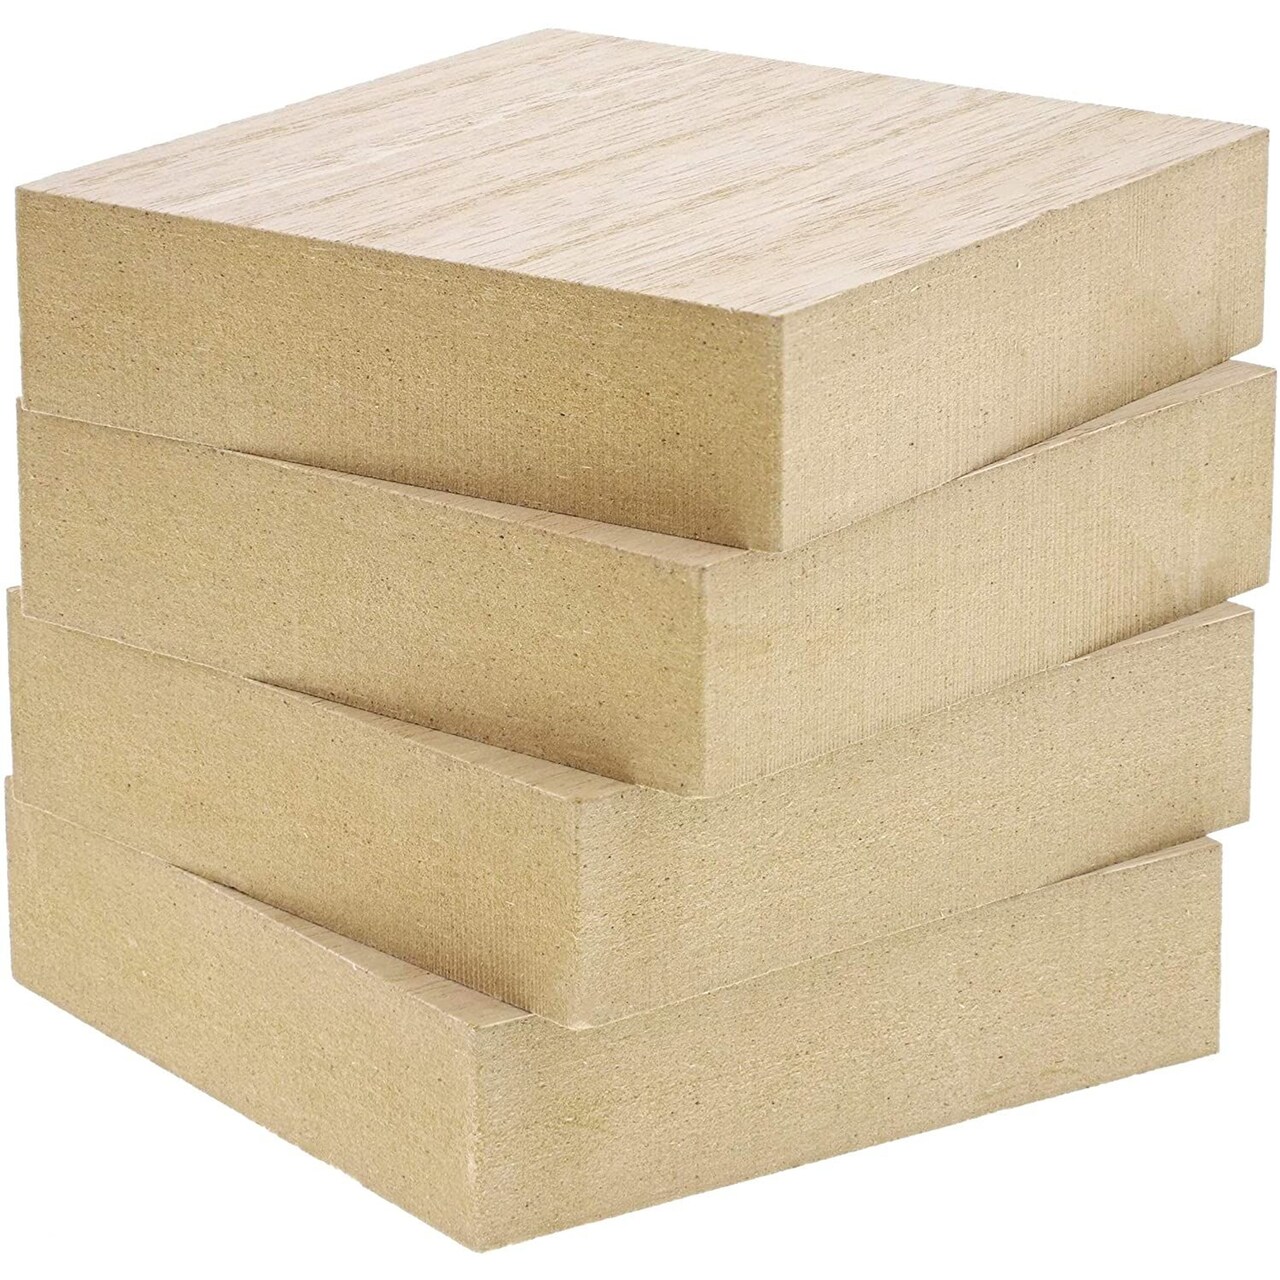 Unfinished MDF Wood Blocks for Crafts, 1 In Thick Wooden Square Blocks (4x4 In, 4 Pack)